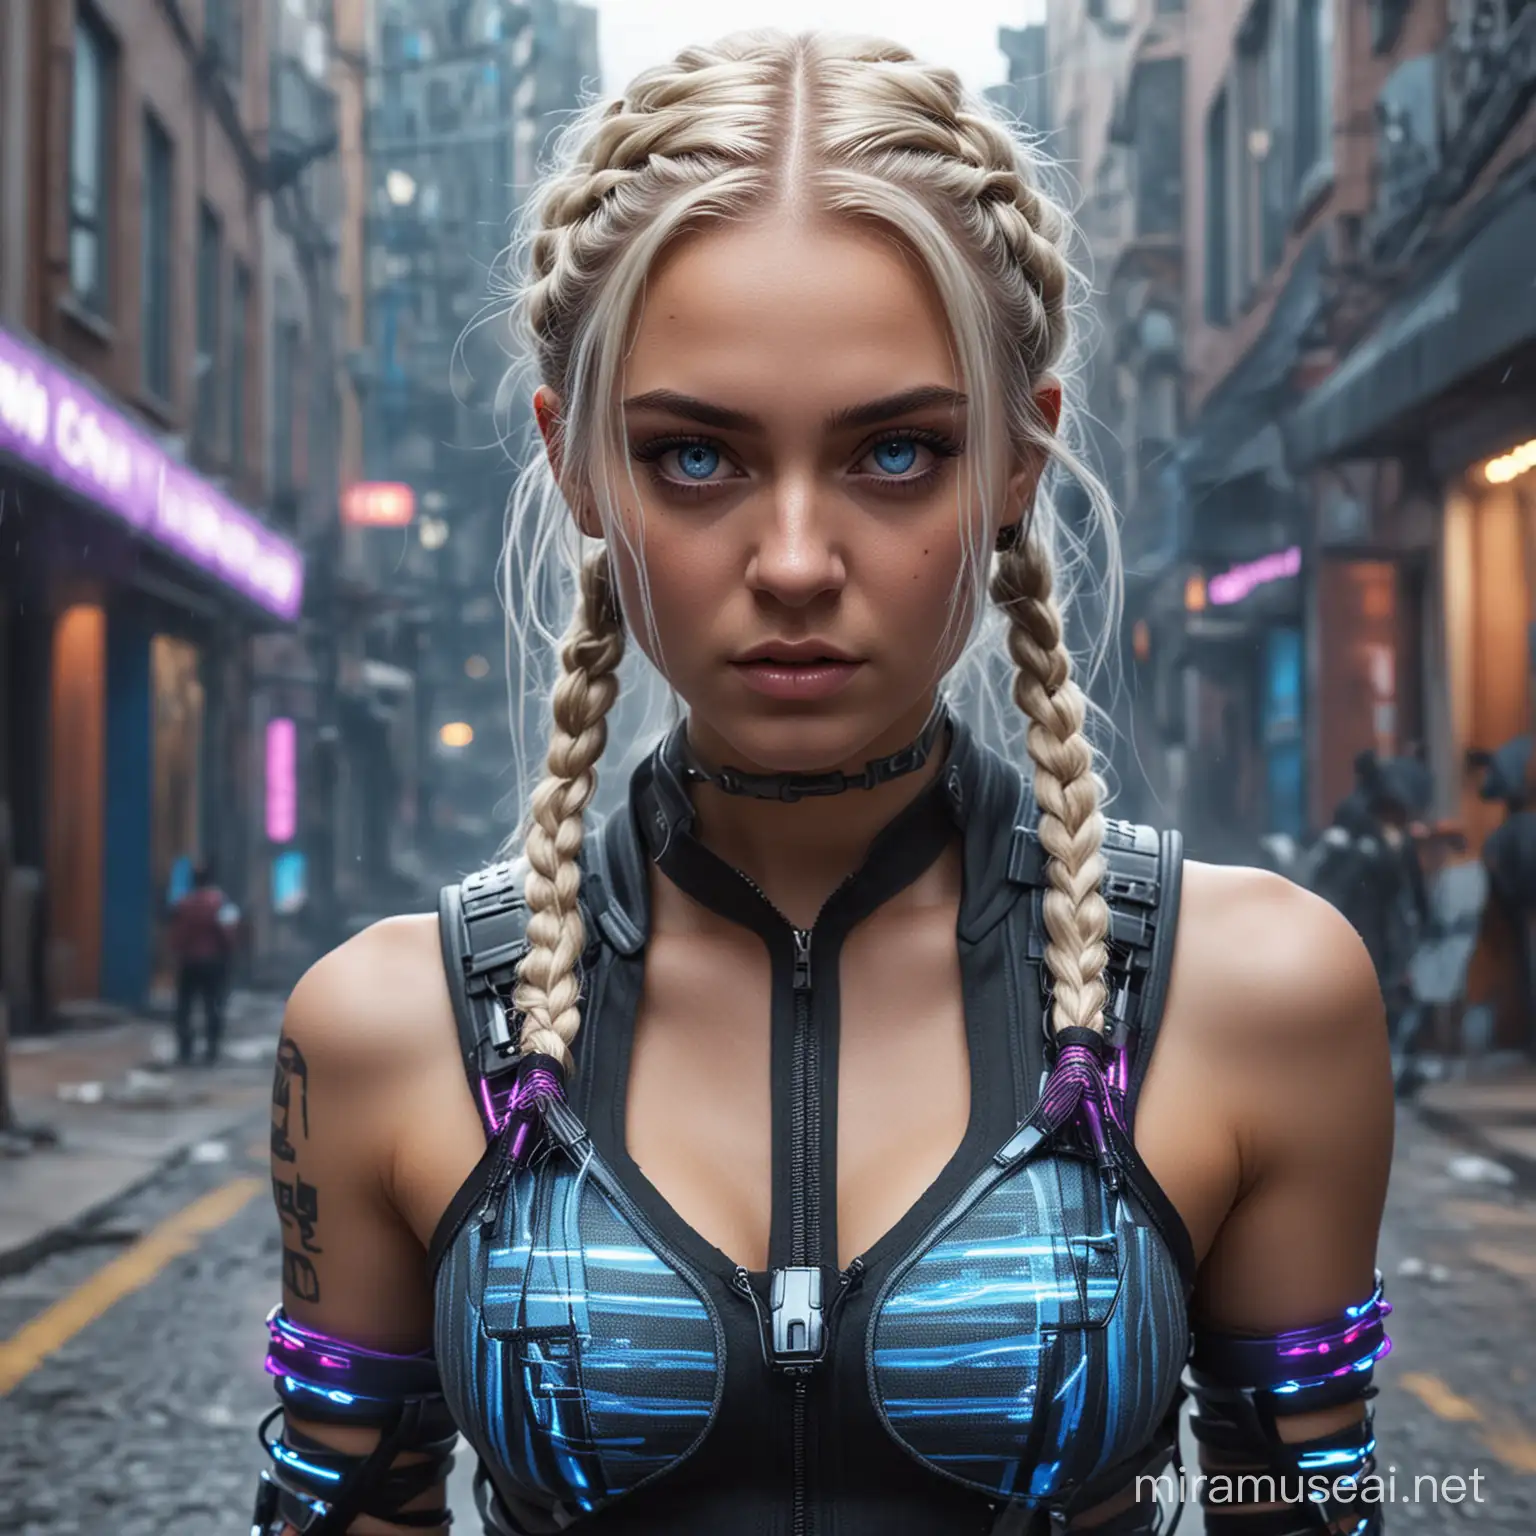 Futuristic Cyberpunk Young Woman with Electrodes and Glowing Eyes on SciFi Street